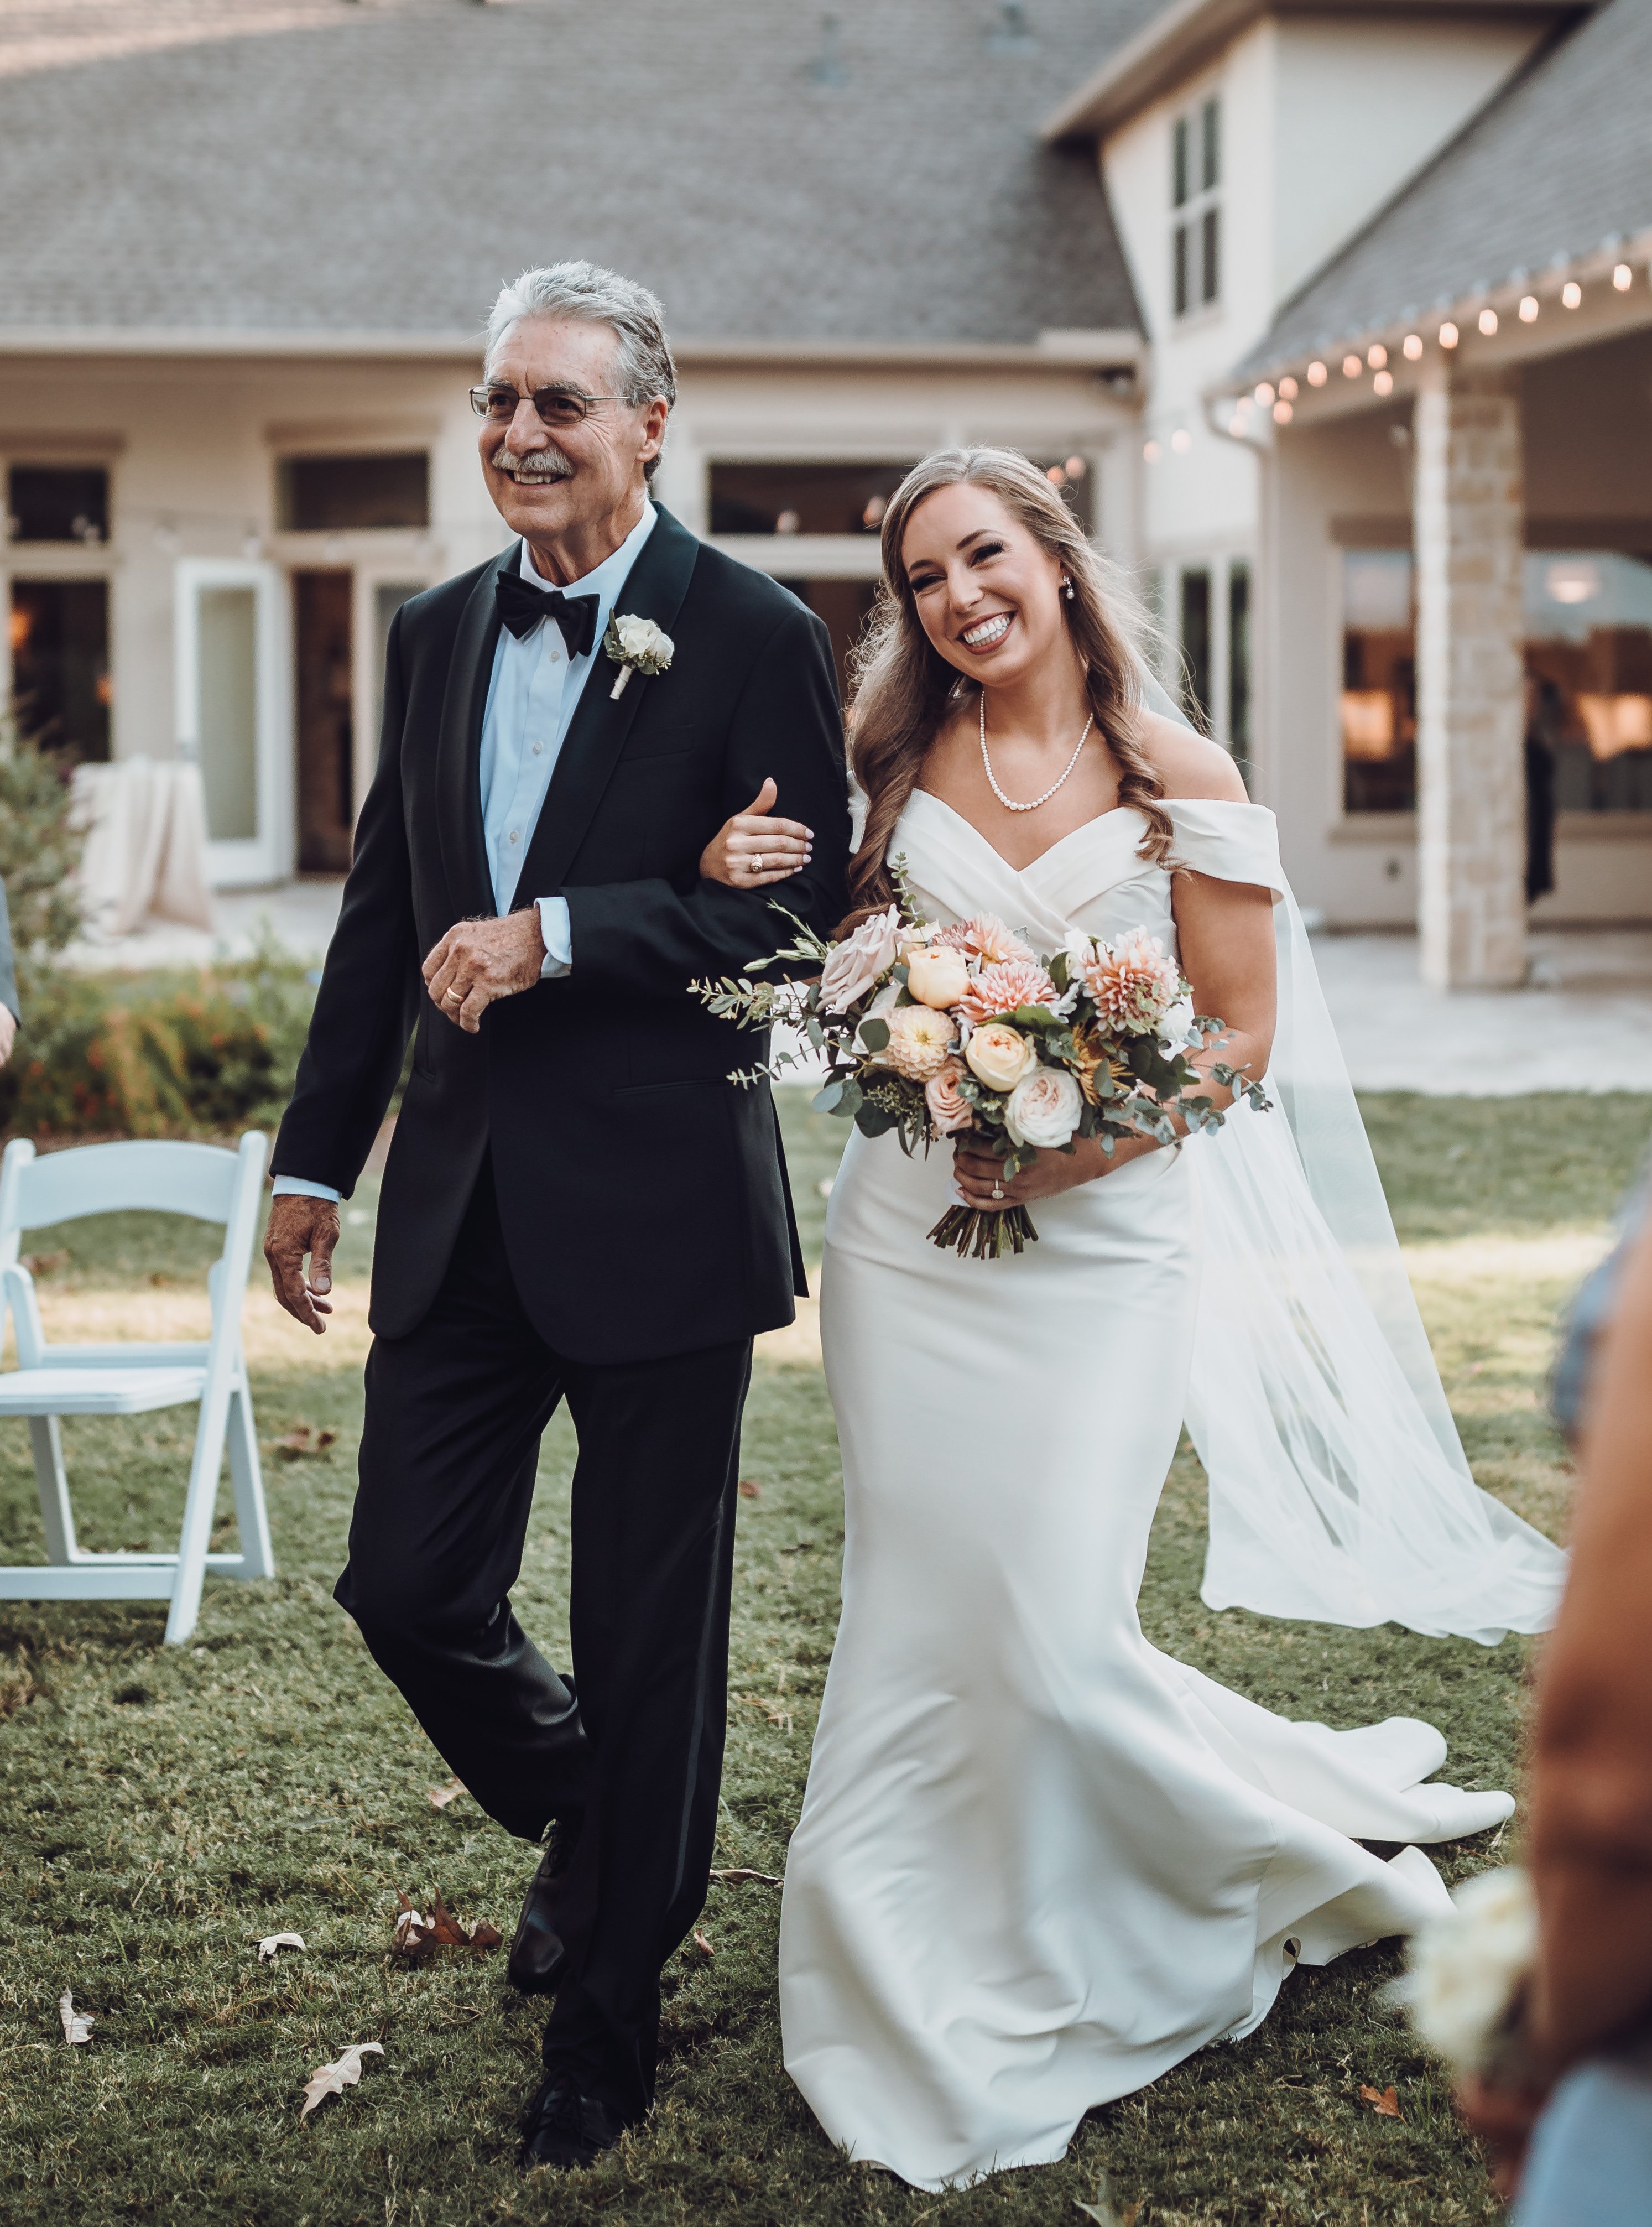 A bride smiles while walking down the aisle with her dad by her side.